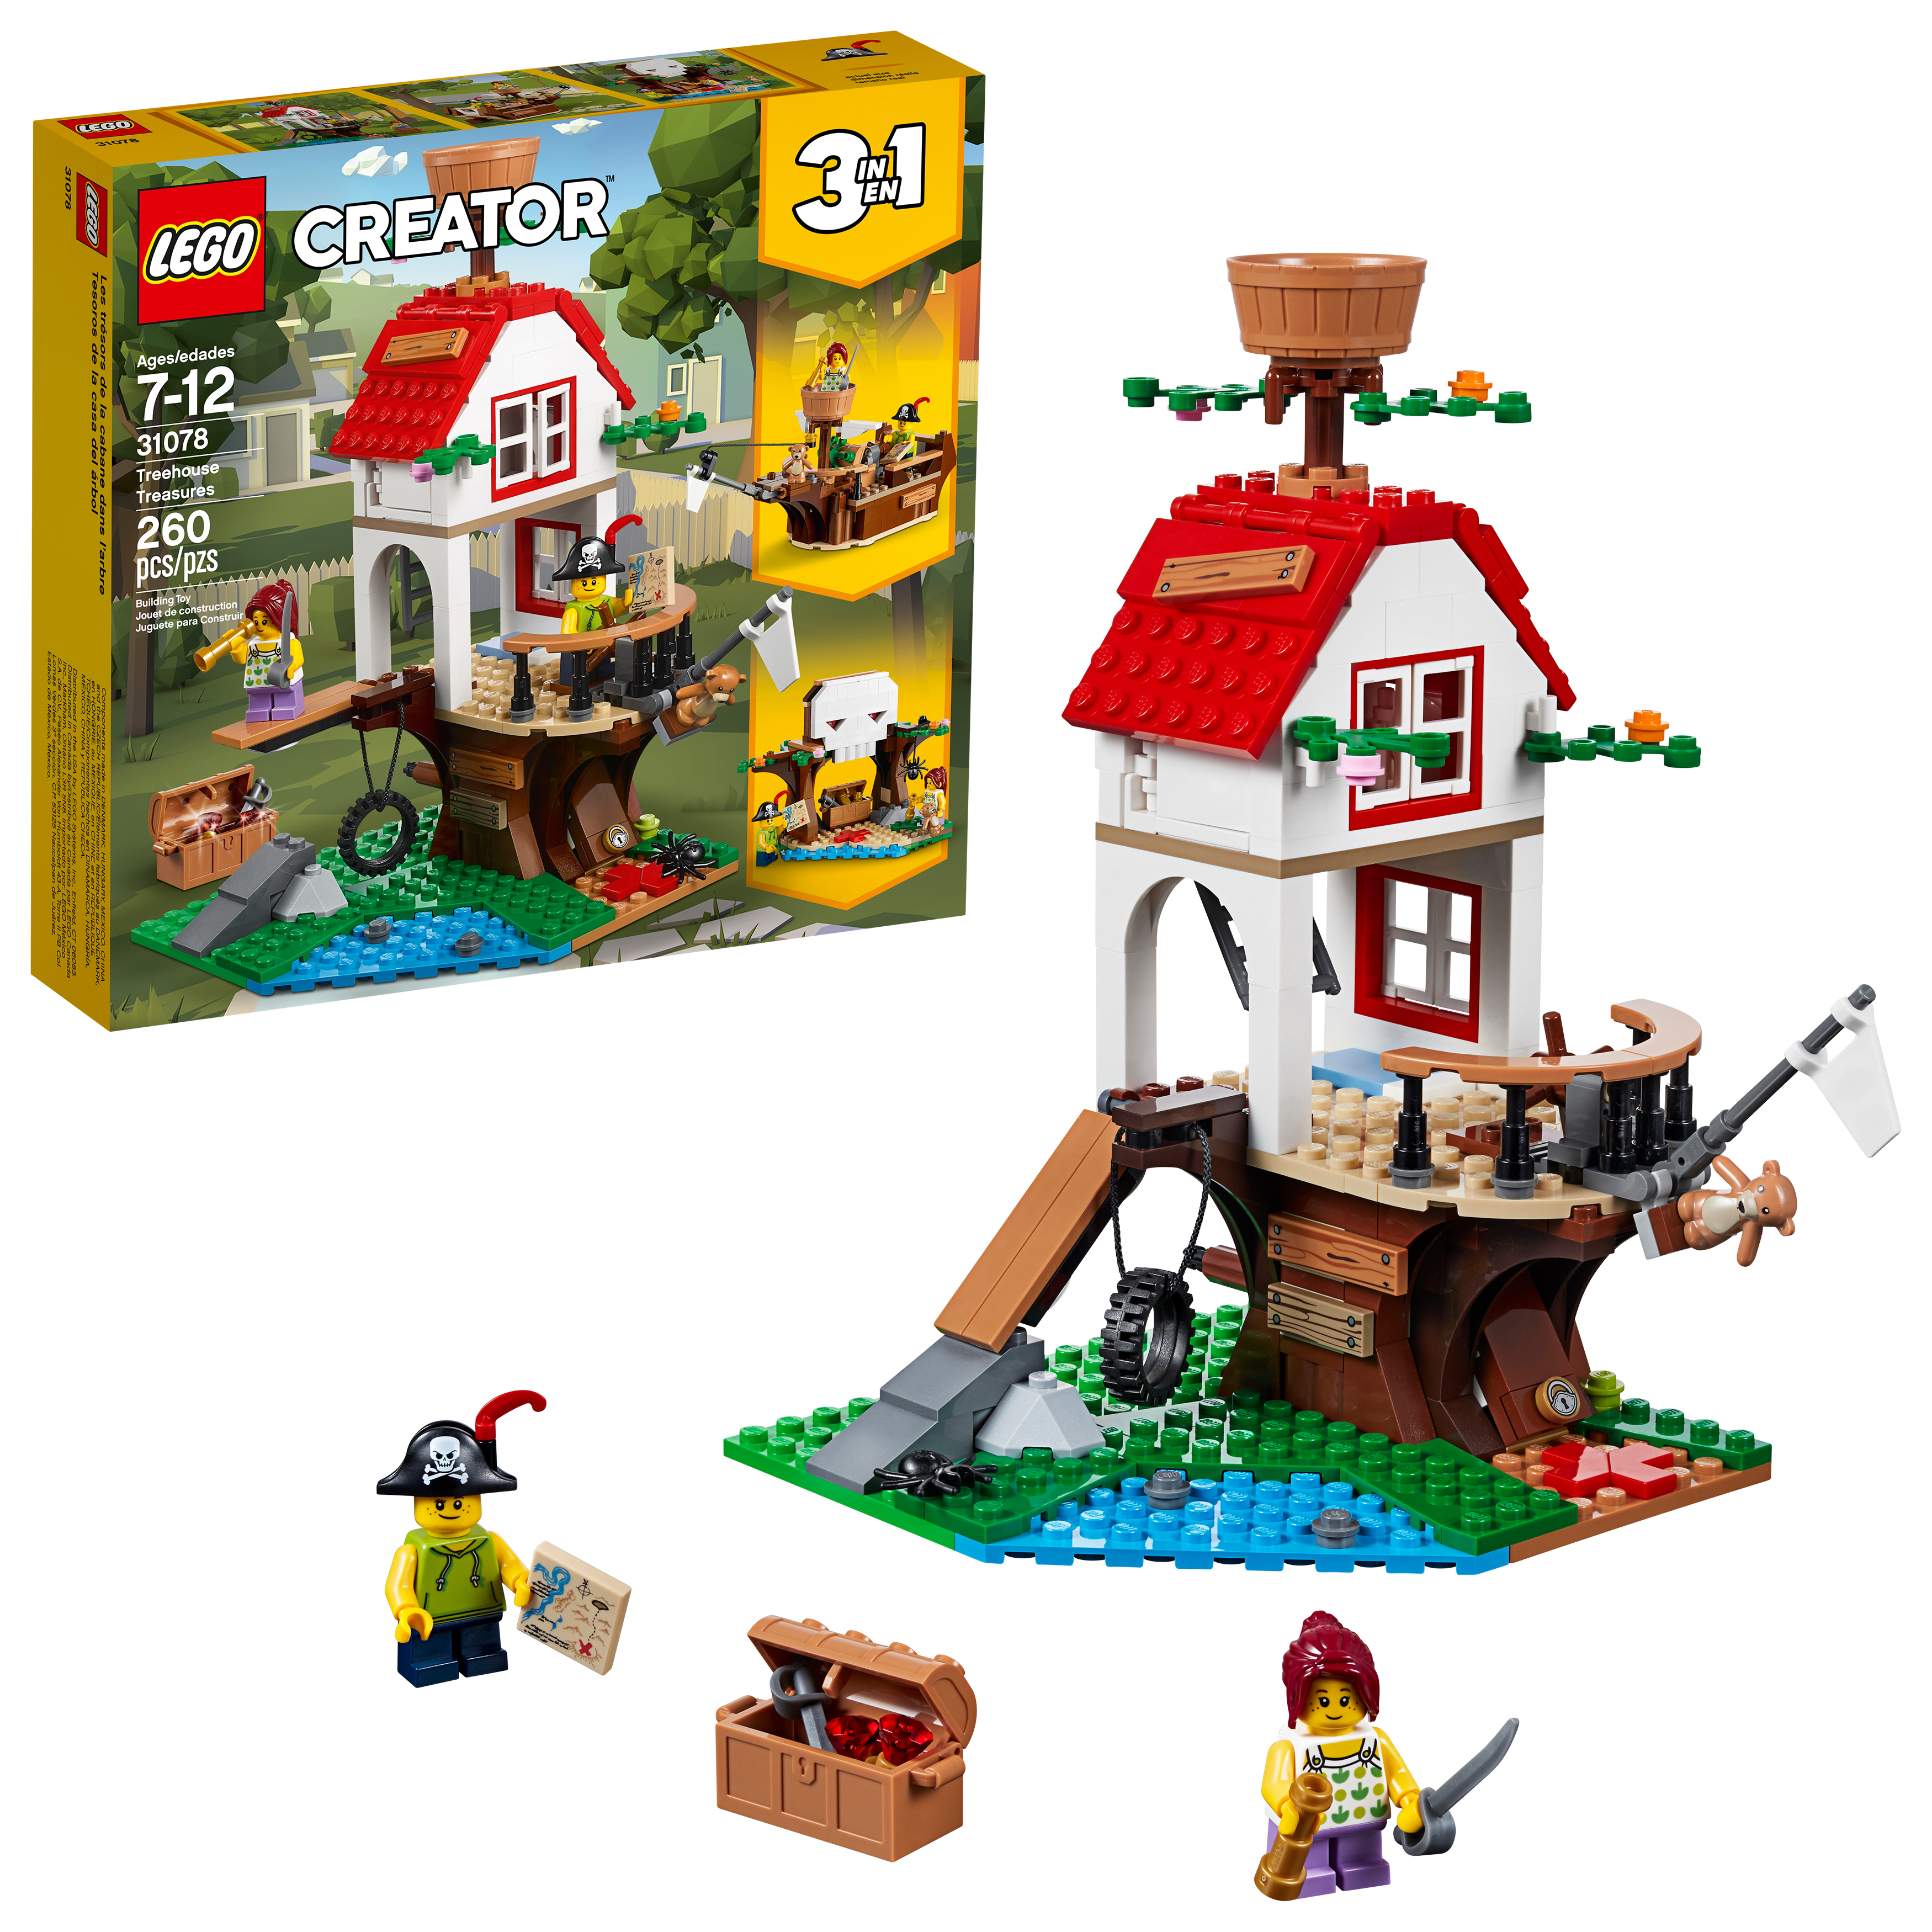 LEGO Creator 3in1 Treehouse Treasures Playset – Only $17.99!